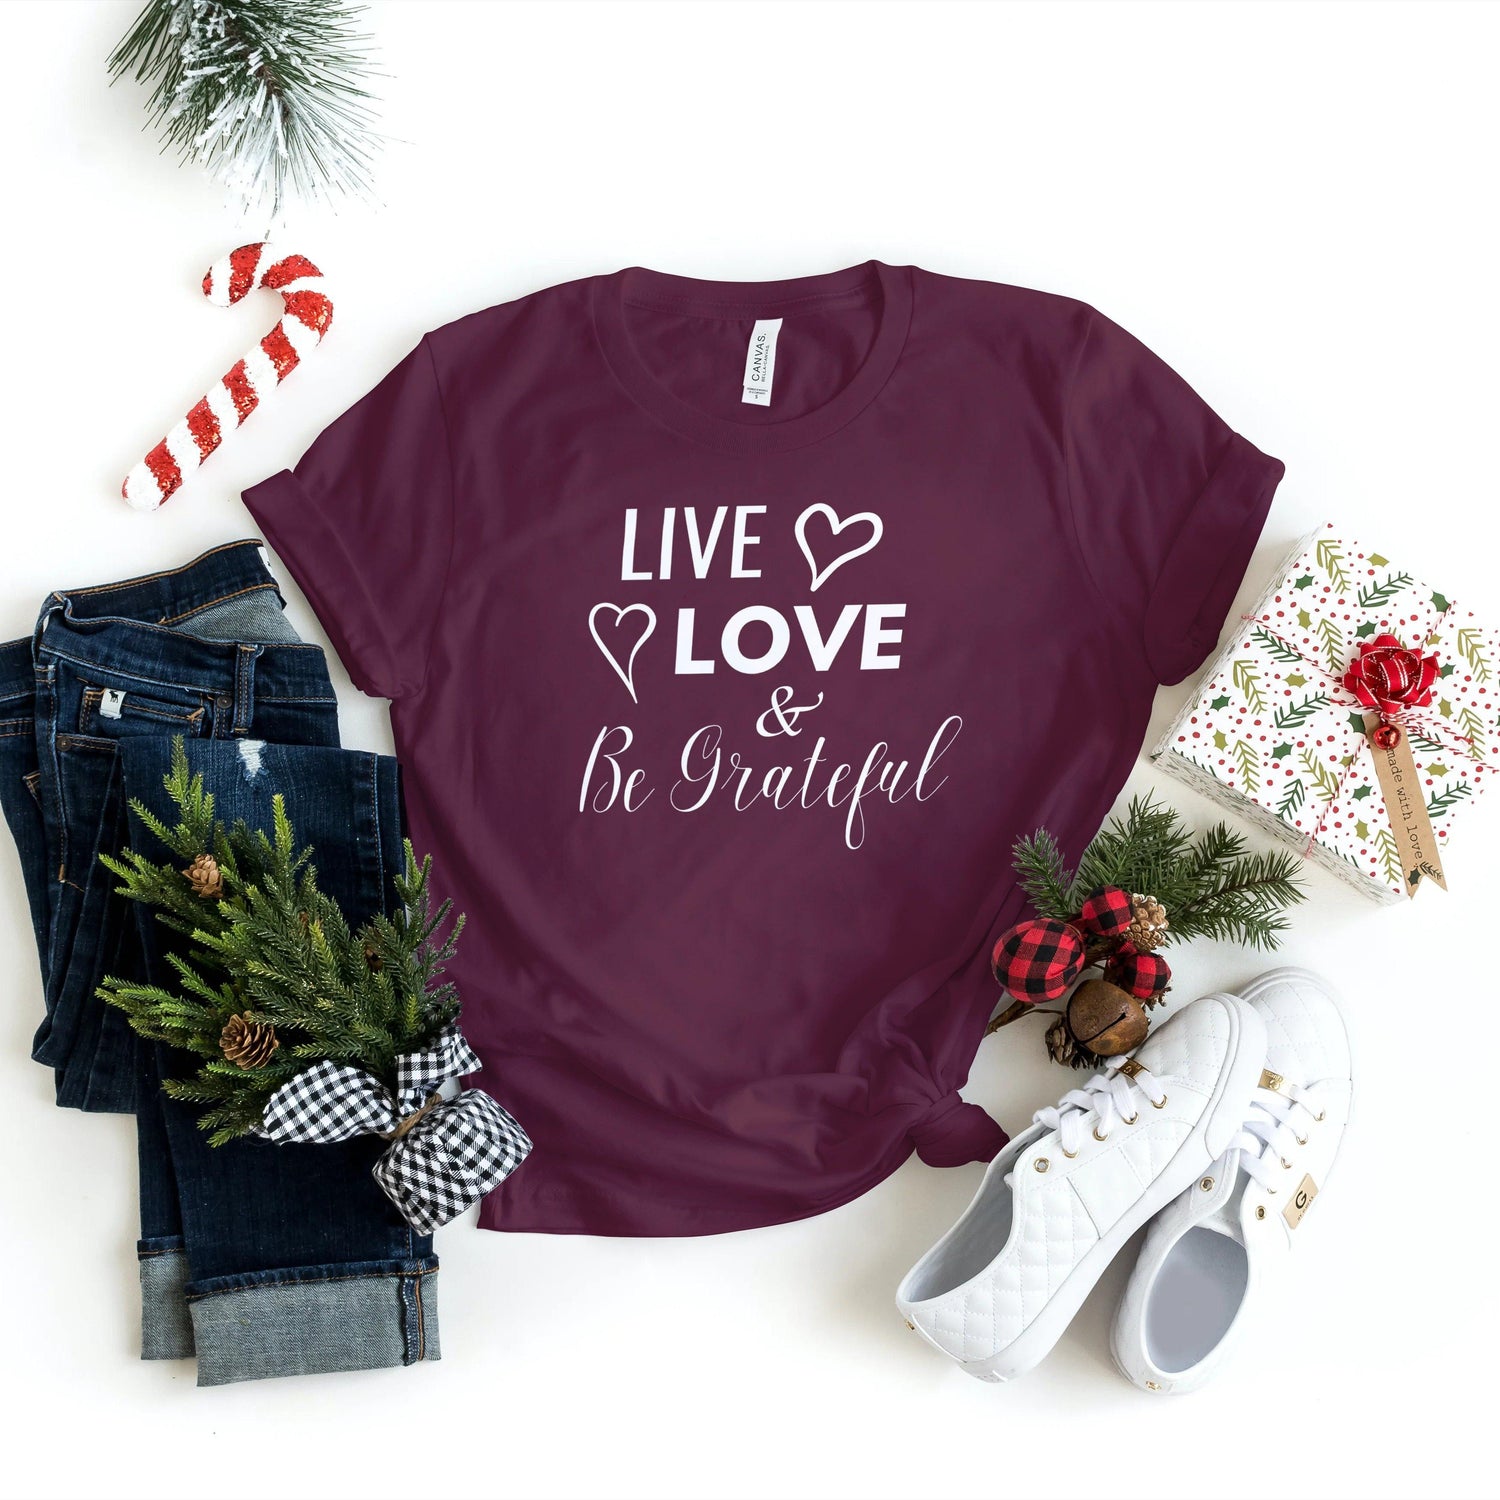 Live Love & Be Grateful - T-Shirt - Healthy Wealthy Skinny